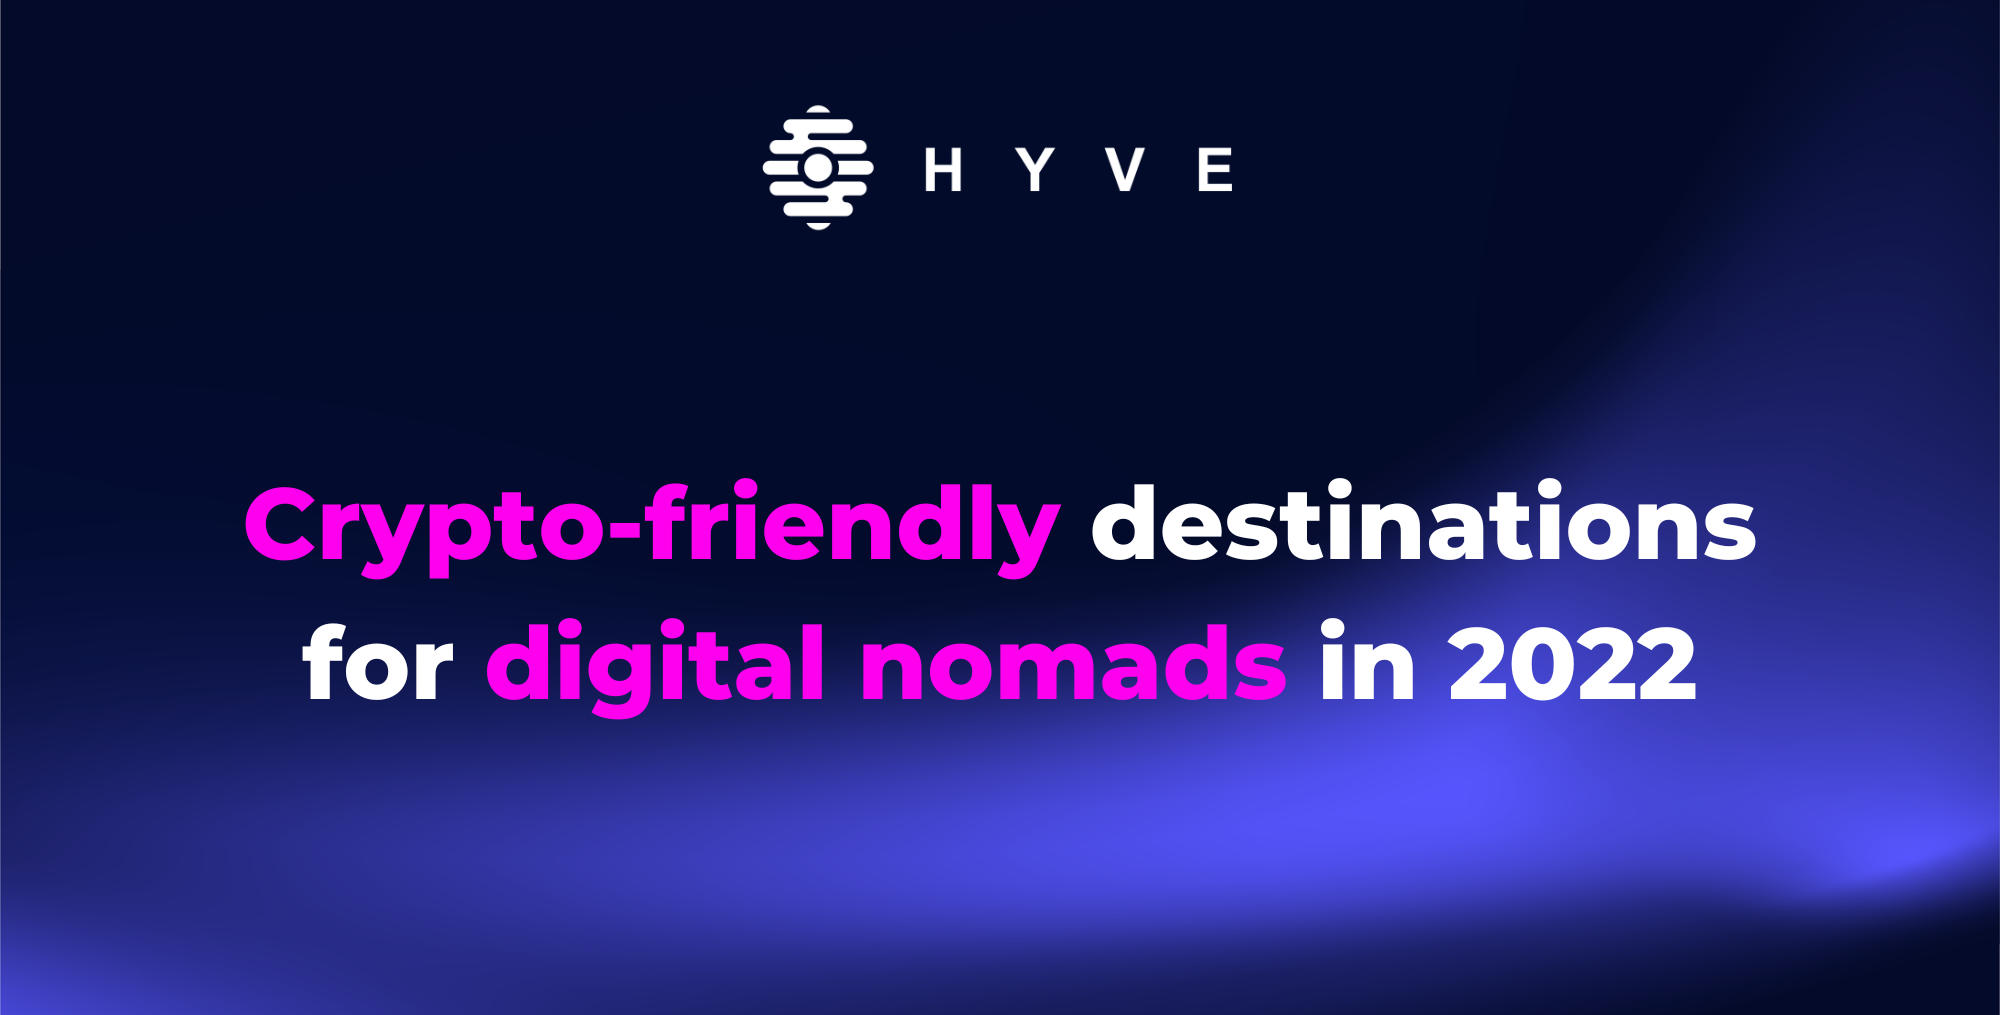 Crypto-friendly destinations for digital nomads in 2022